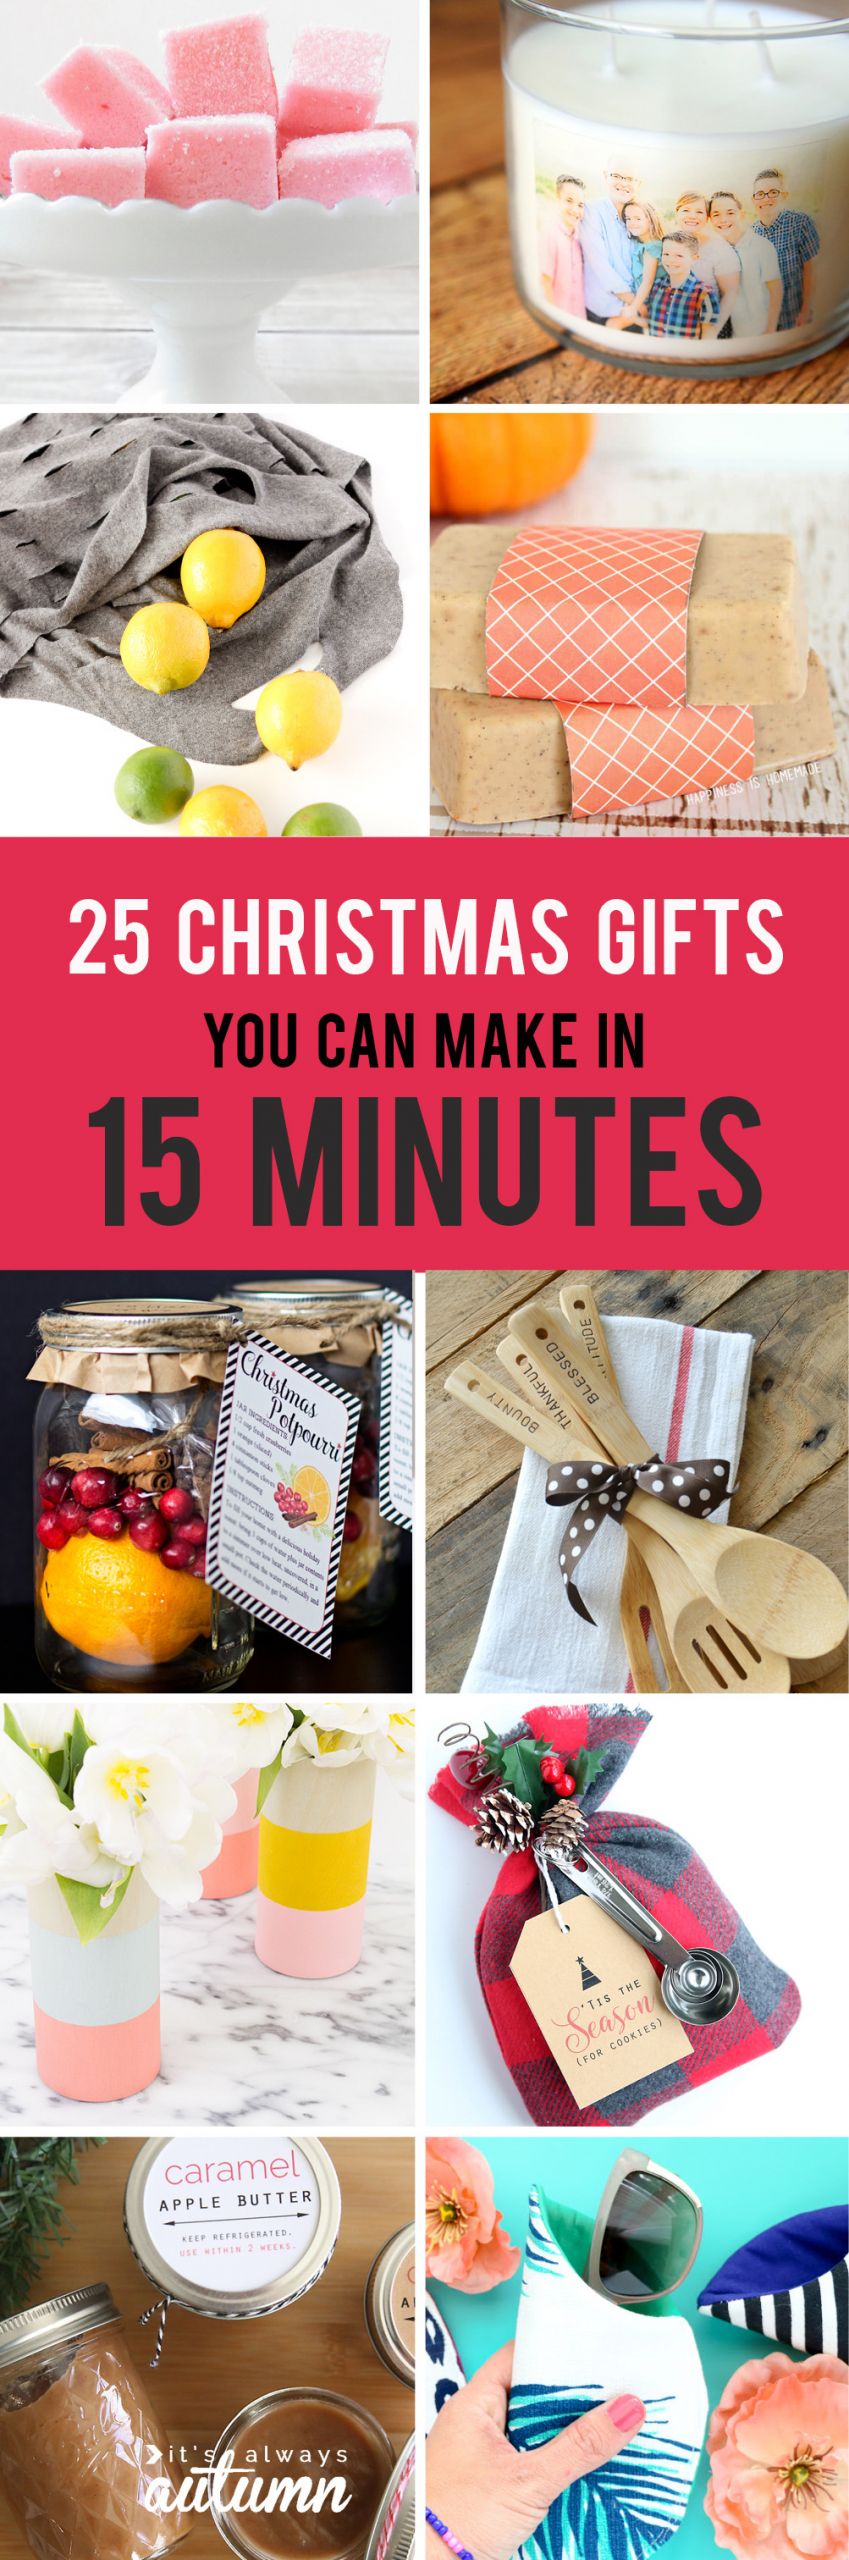 DIY Projects For Christmas Gifts
 25 easy homemade Christmas ts you can make in 15